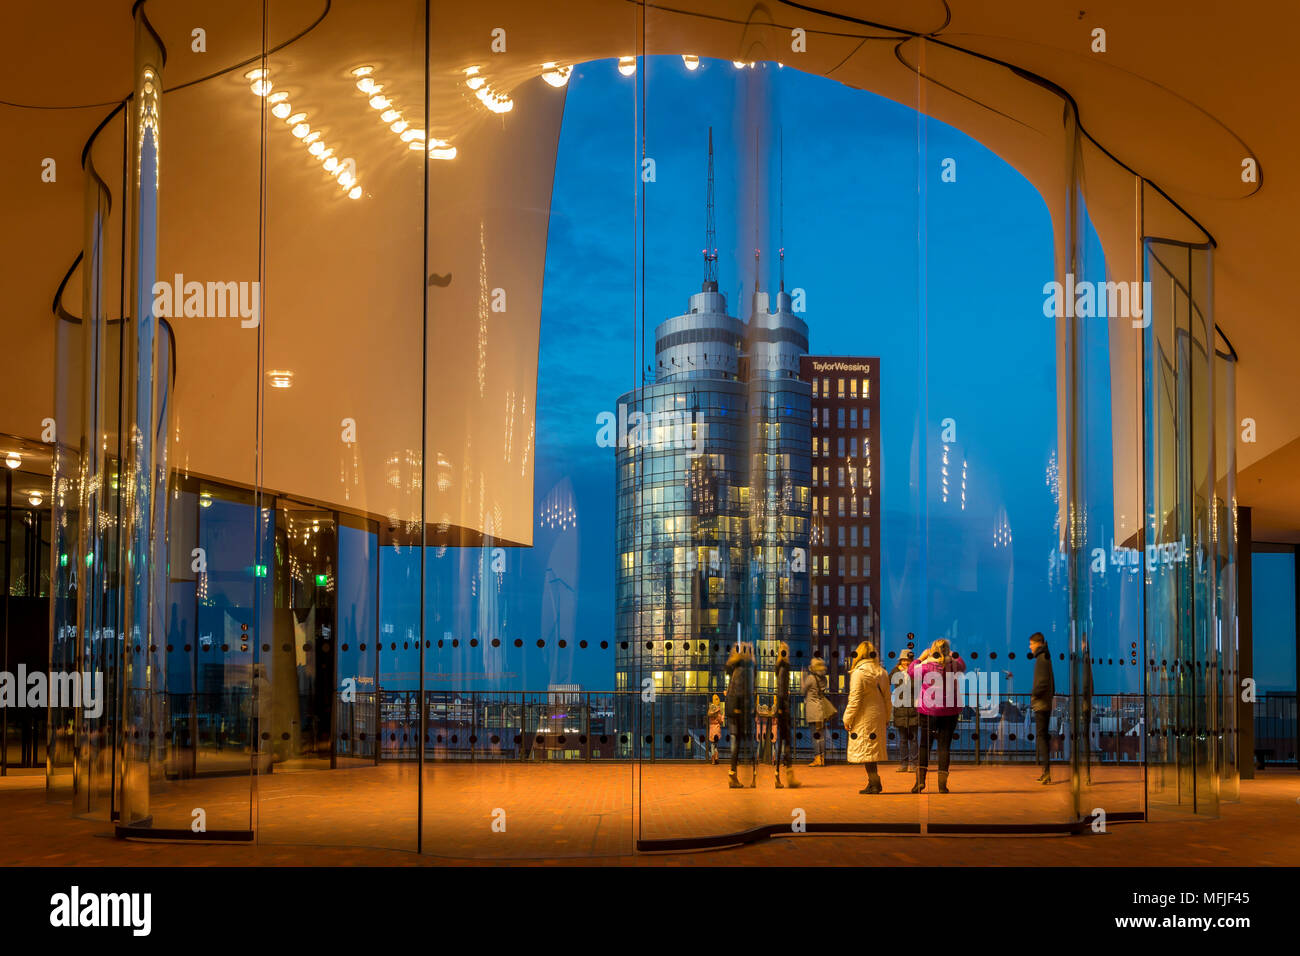 View from the Plaza of the Elbphilharmonie building, Hamburg, Germany, Europe Stock Photo